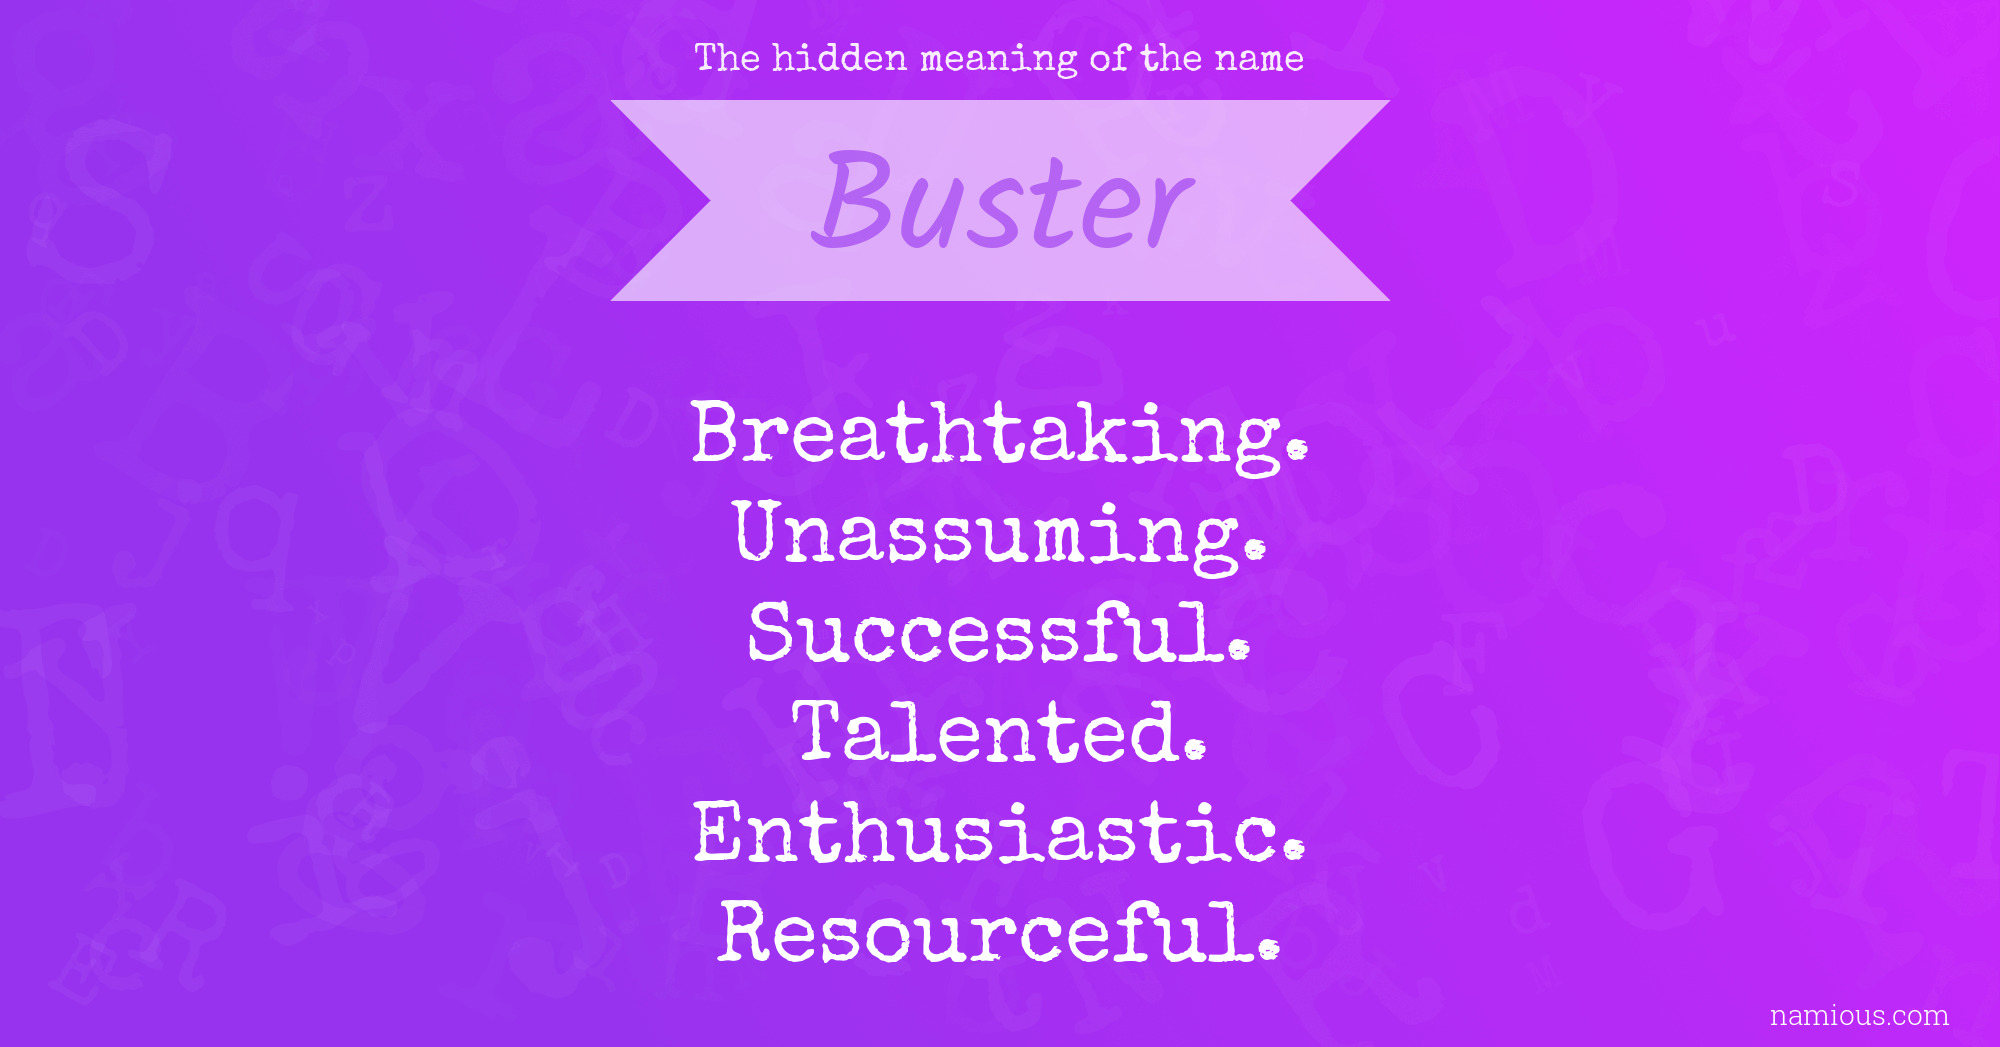 The hidden meaning of the name Buster